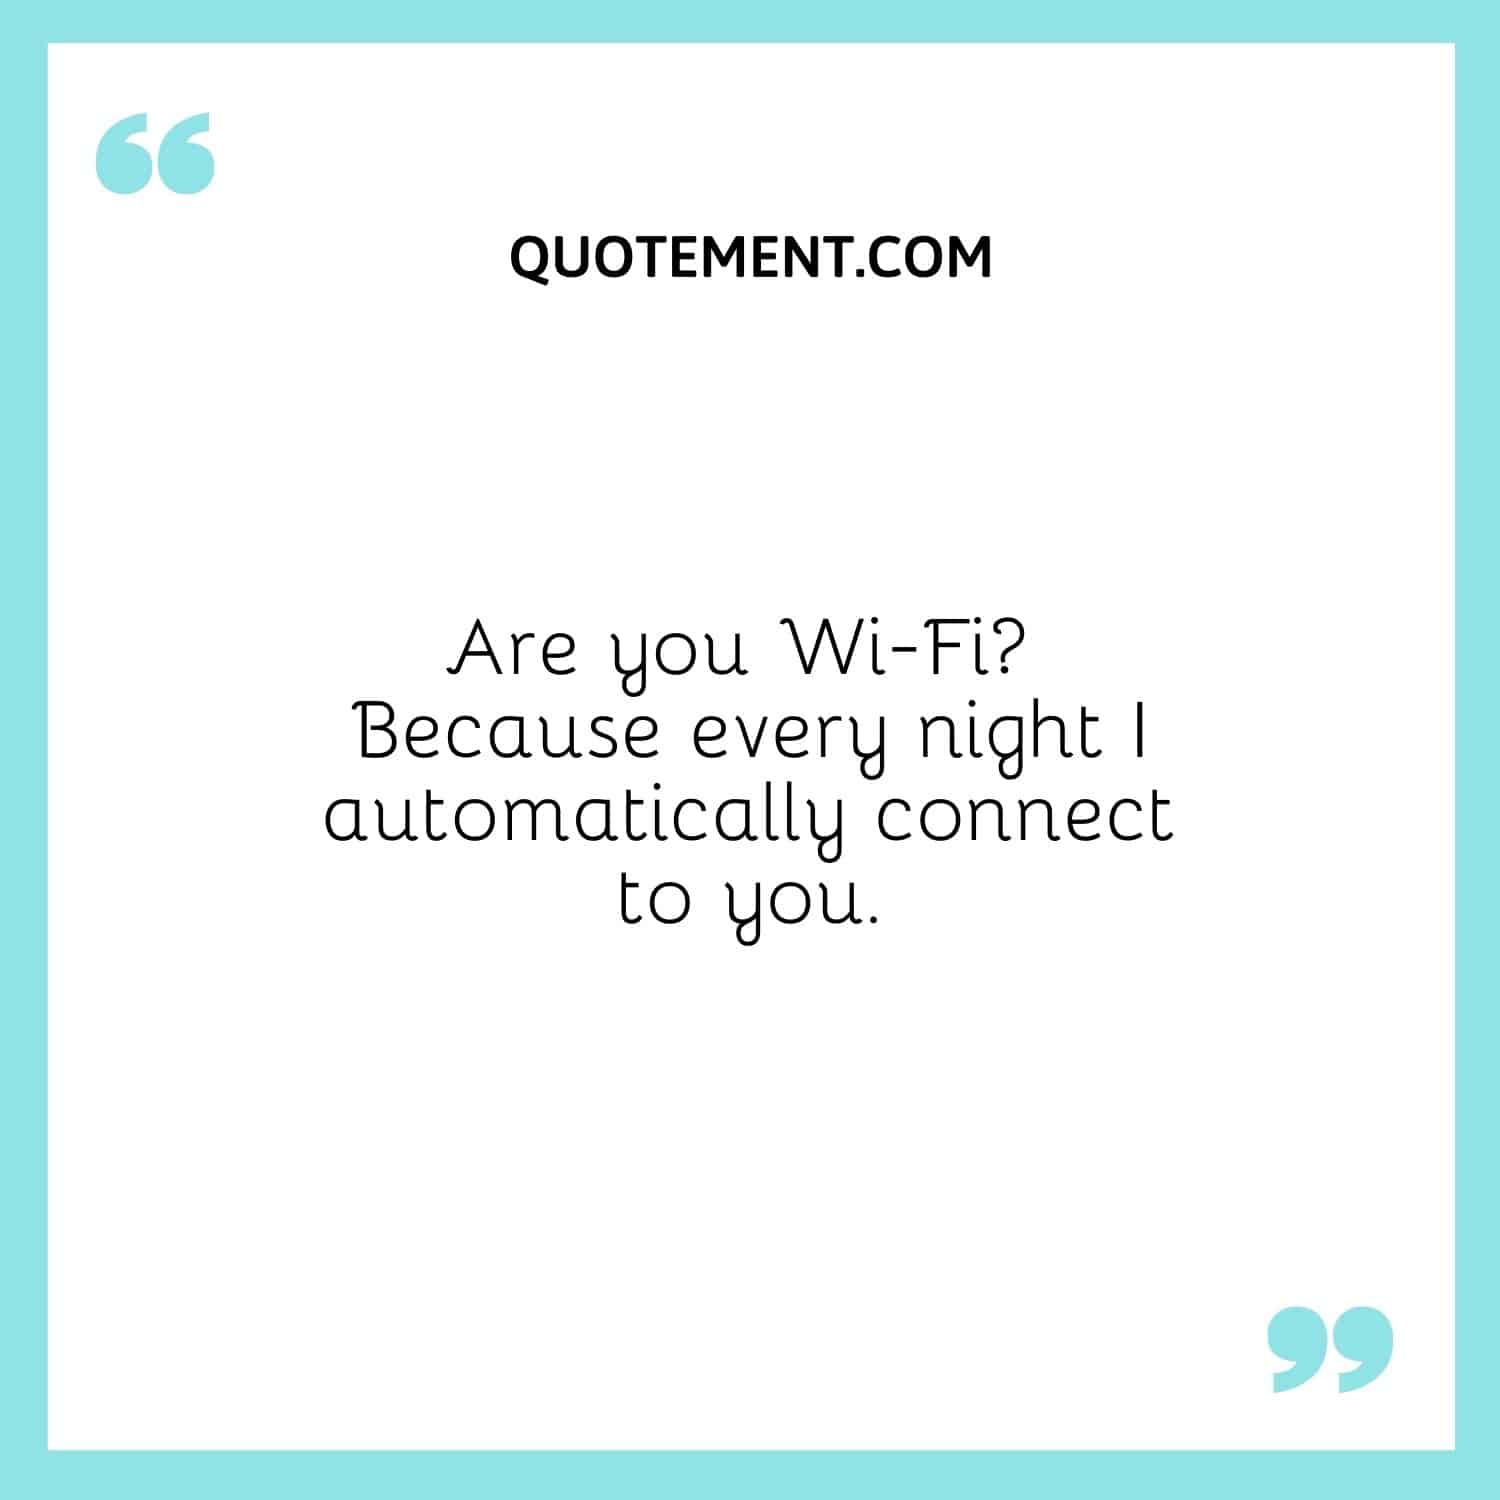 Are you Wi-Fi Because every night I automatically connect to you